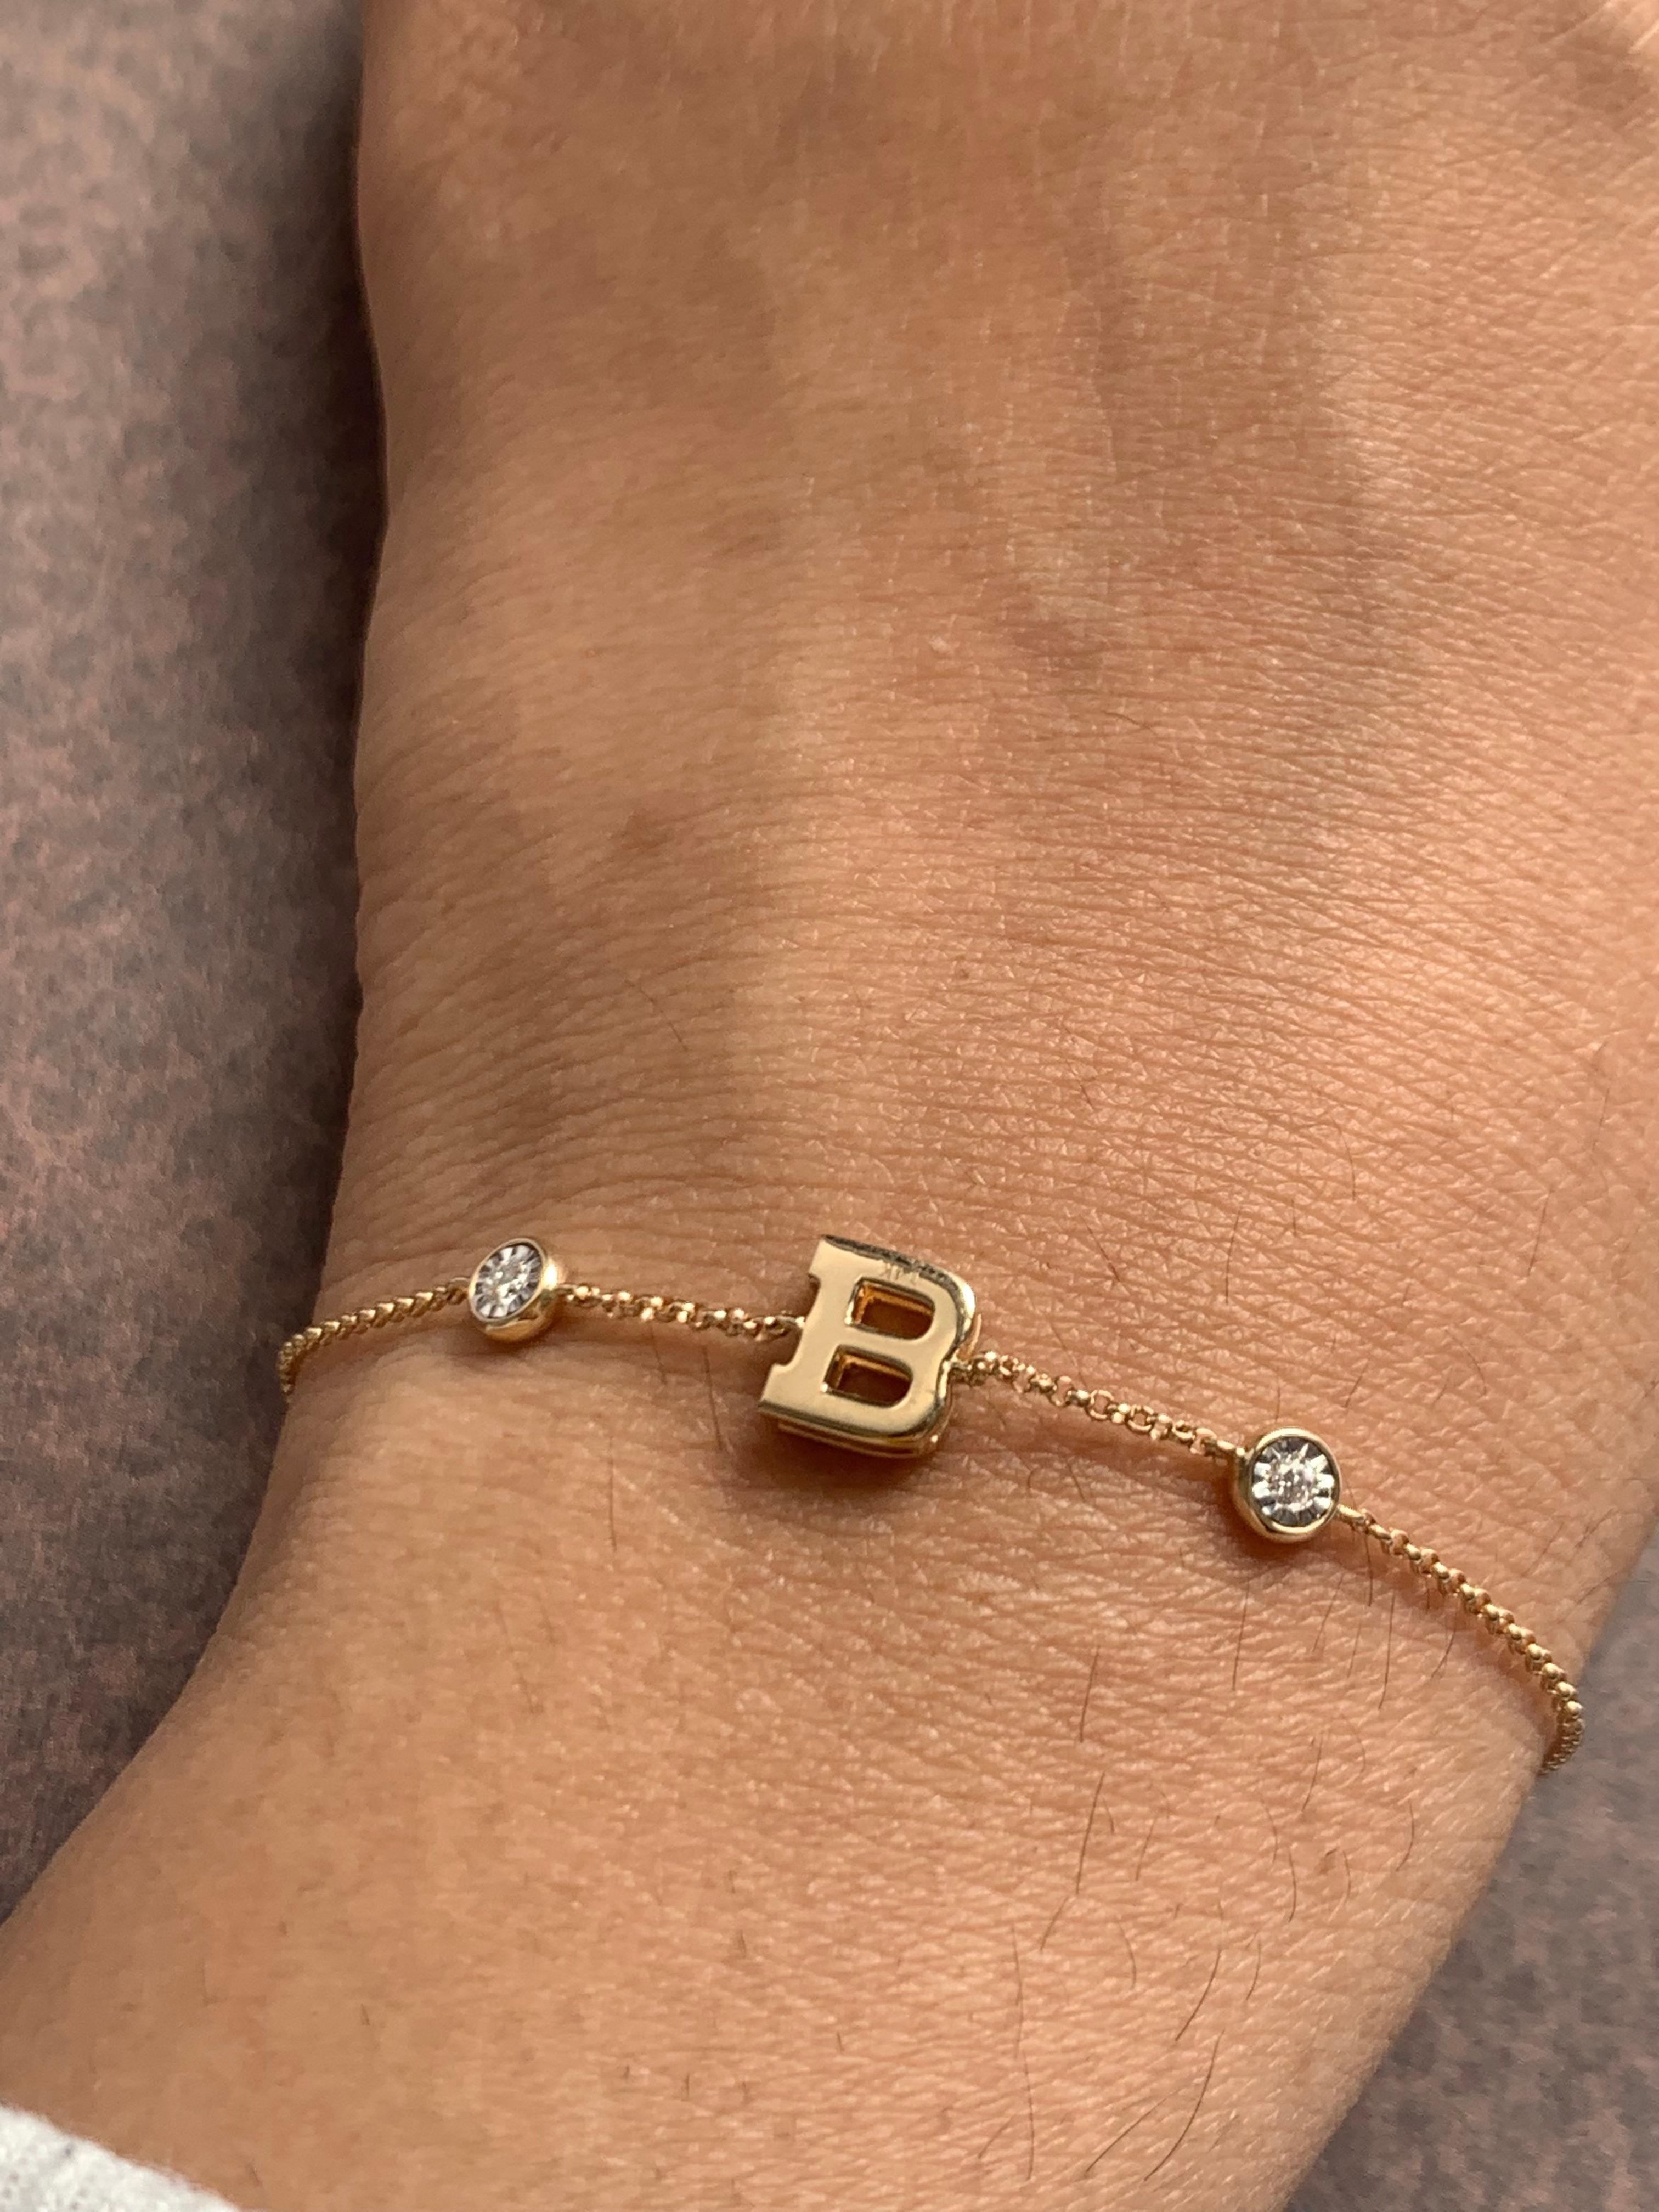 Solid gold initial bracelets with diamonds! Made in 14k yellow gold, with 2 diamonds, 1 on each side, this bracelet is as beautiful as you! The letters are made with 14k plain gold and the diamonds are set in a miracle disc! You get the look of a